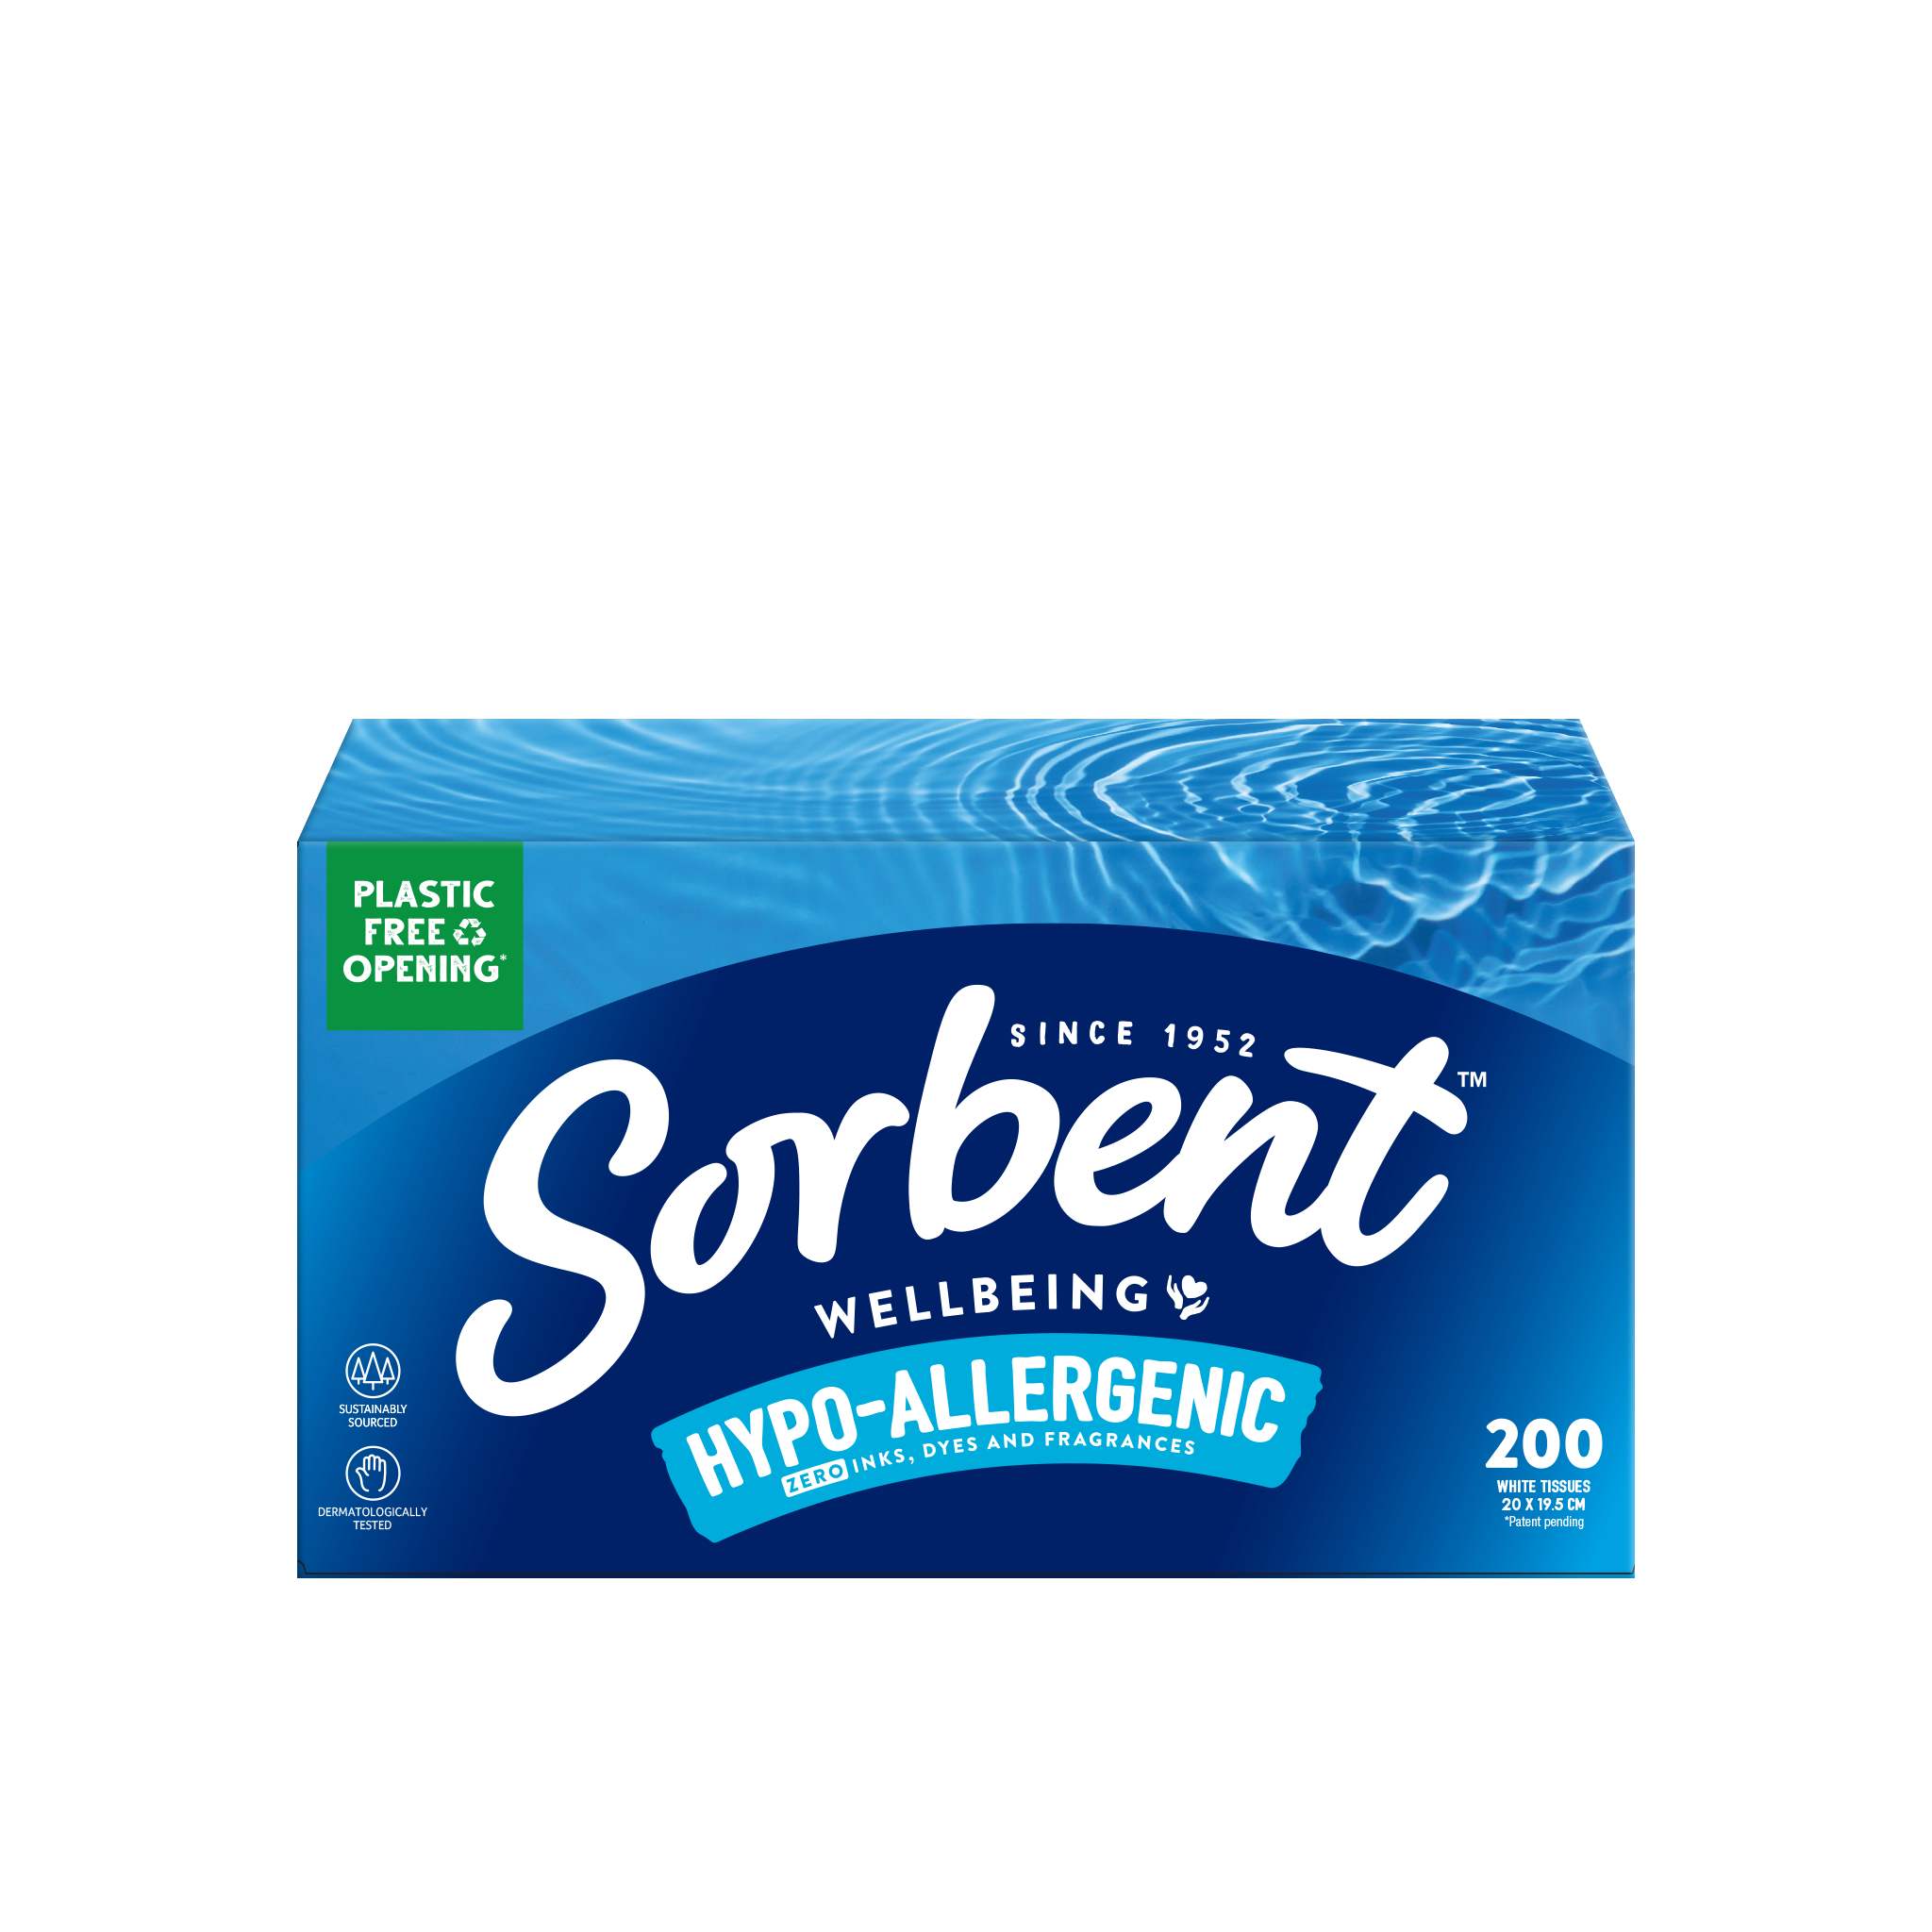 Sorbent Hypo-Allergenic Facial Tissues - 200 Pack